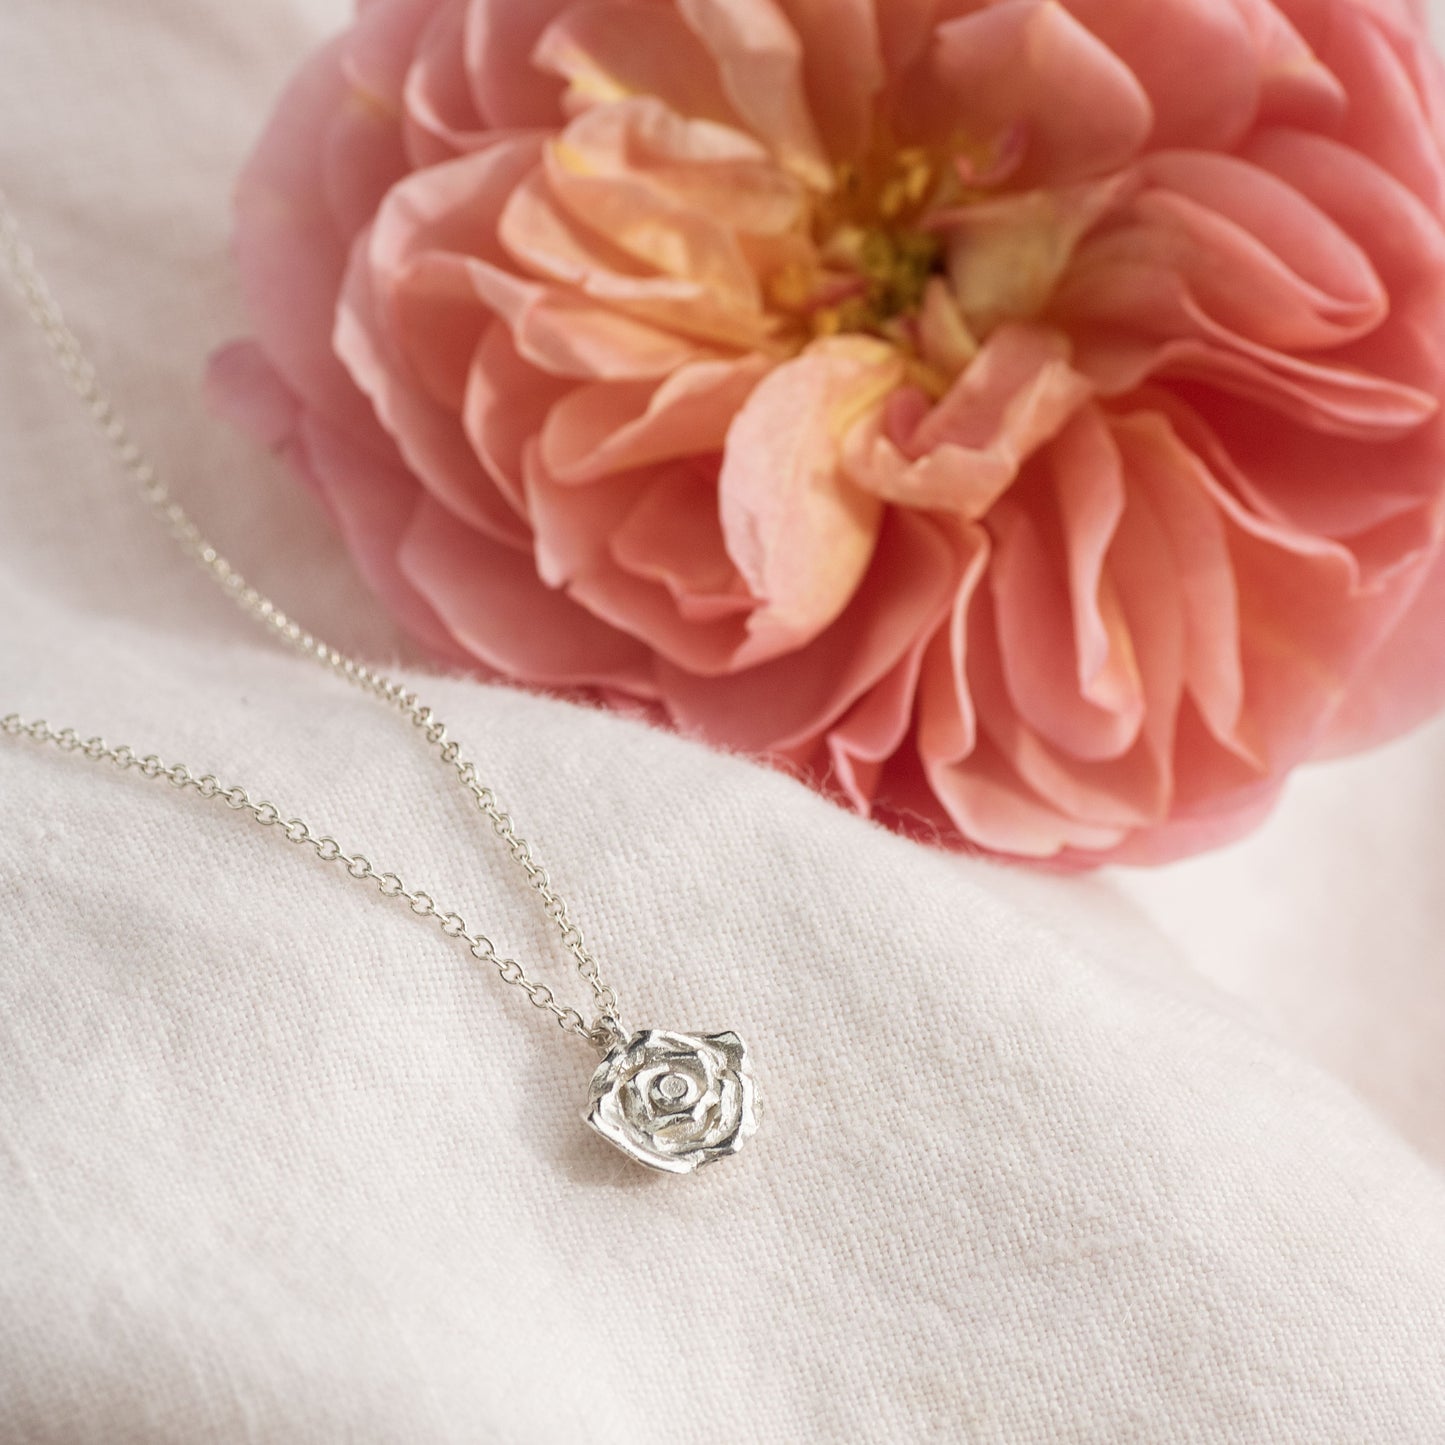 Rose Necklace - Silver